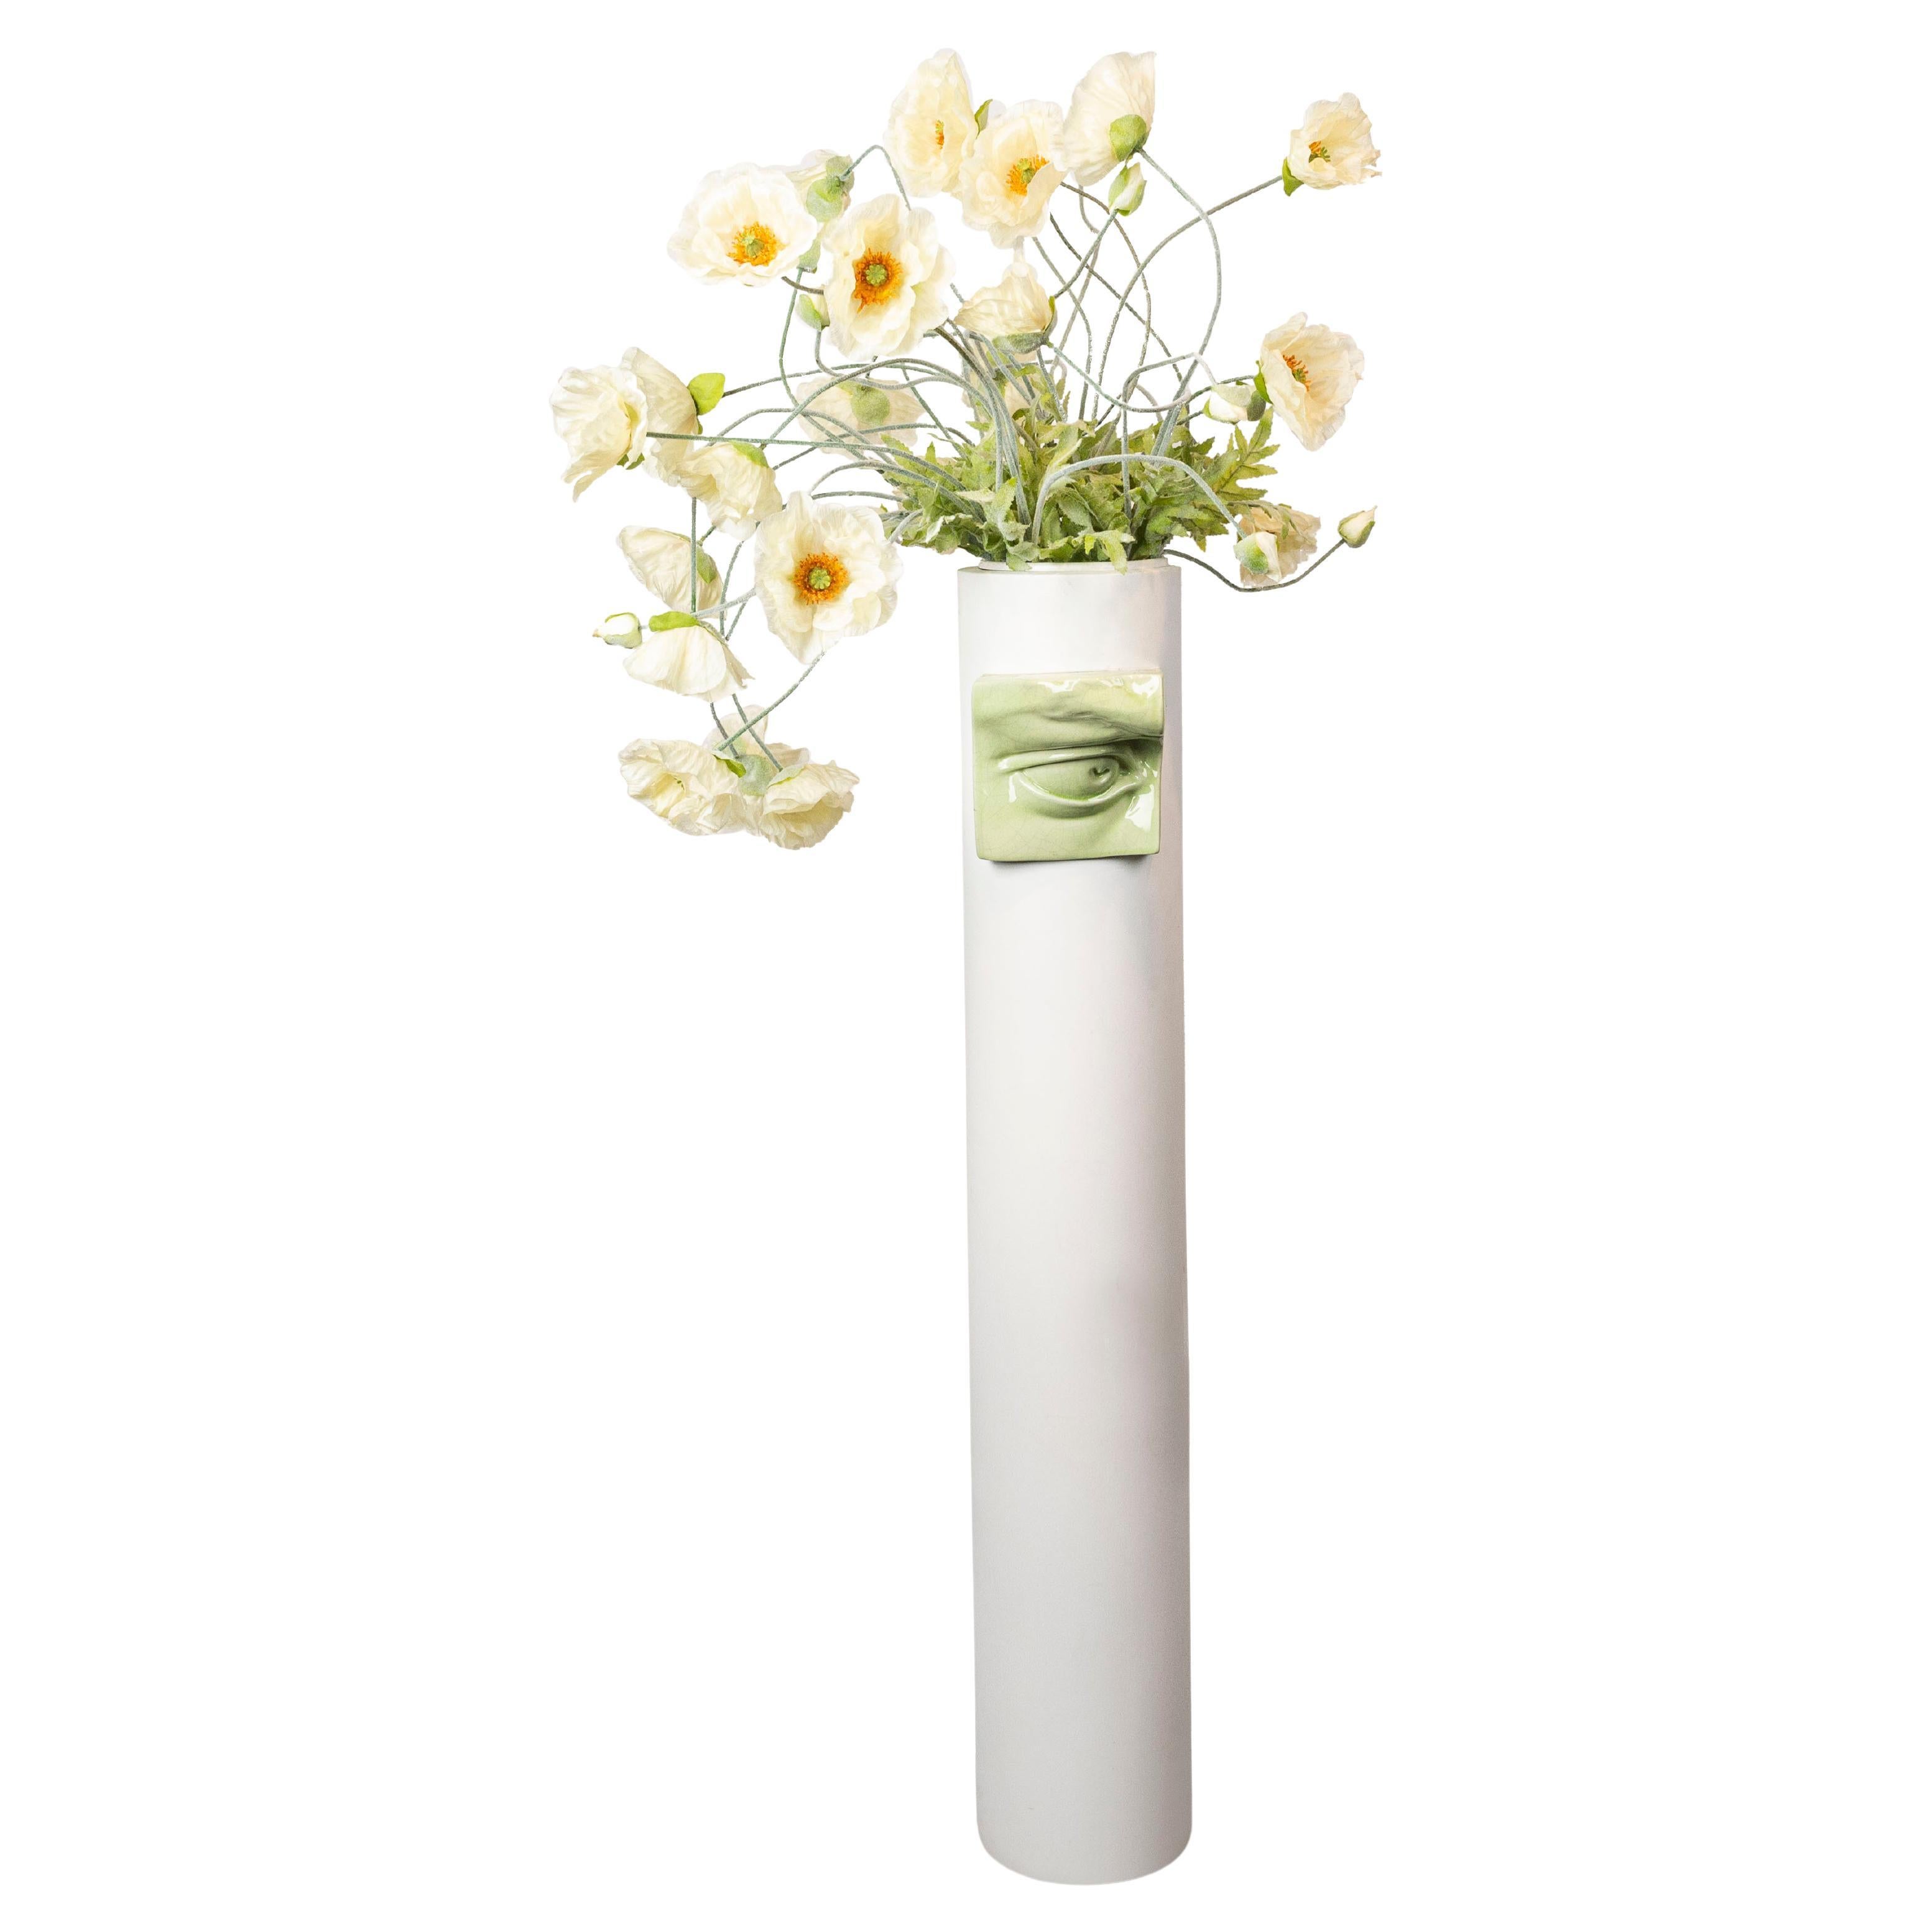 VG-VGnewtrend Vases and Vessels